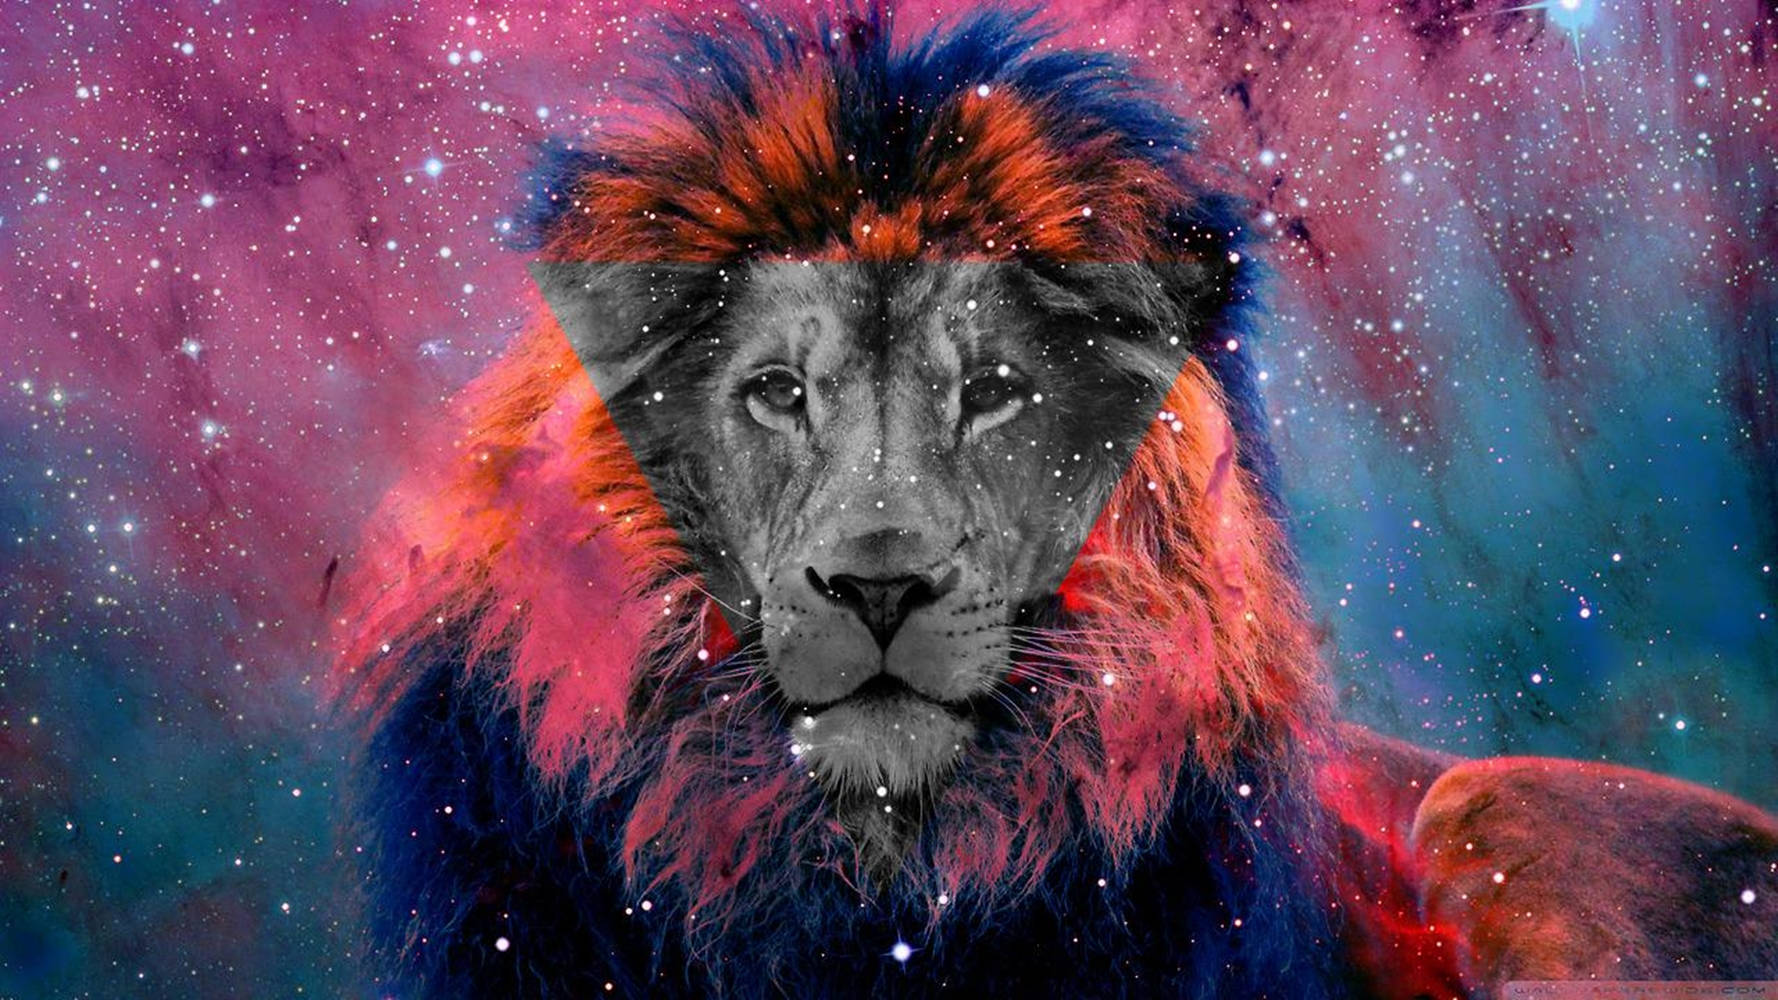 Free Galaxy Lion Wallpaper Downloads, [100+] Galaxy Lion Wallpapers for  FREE 